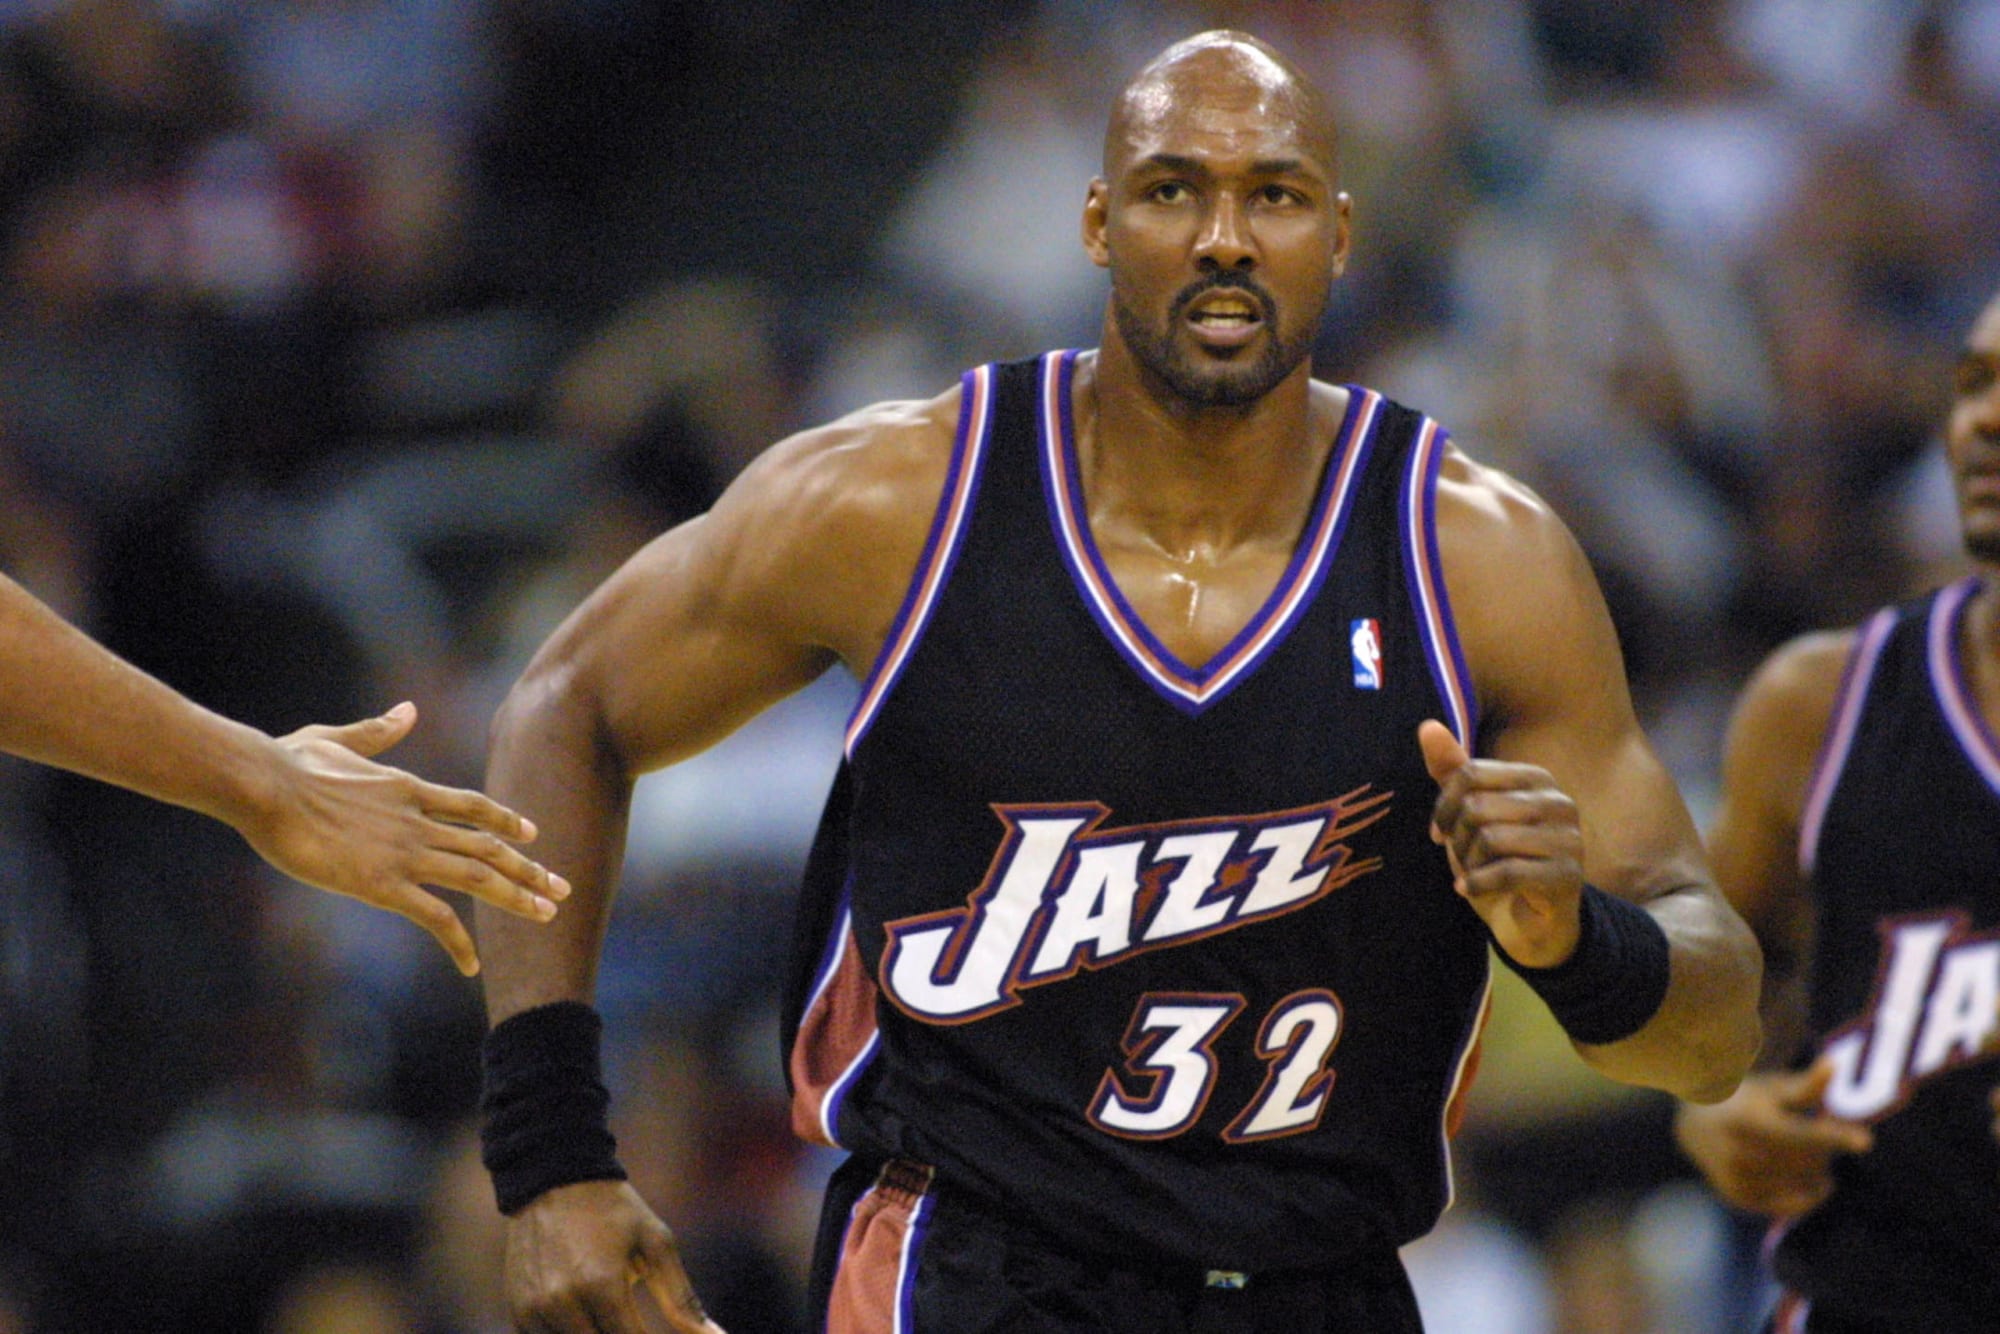 A new era How would Karl Malone fit in the modern NBA?